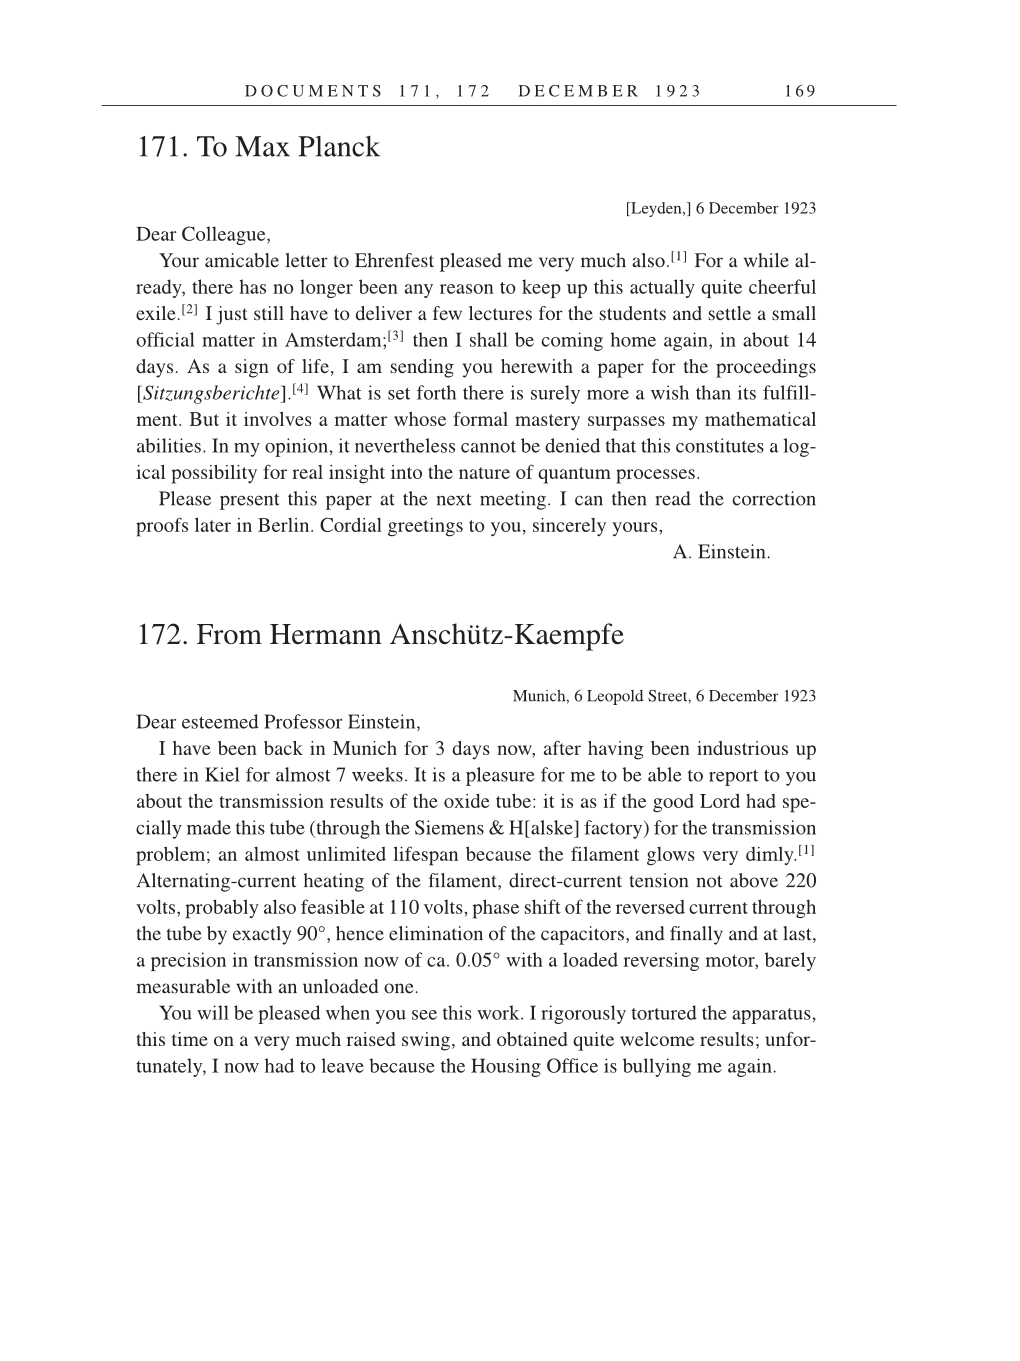 Volume 14: The Berlin Years: Writings & Correspondence, April 1923-May 1925 (English Translation Supplement) page 169